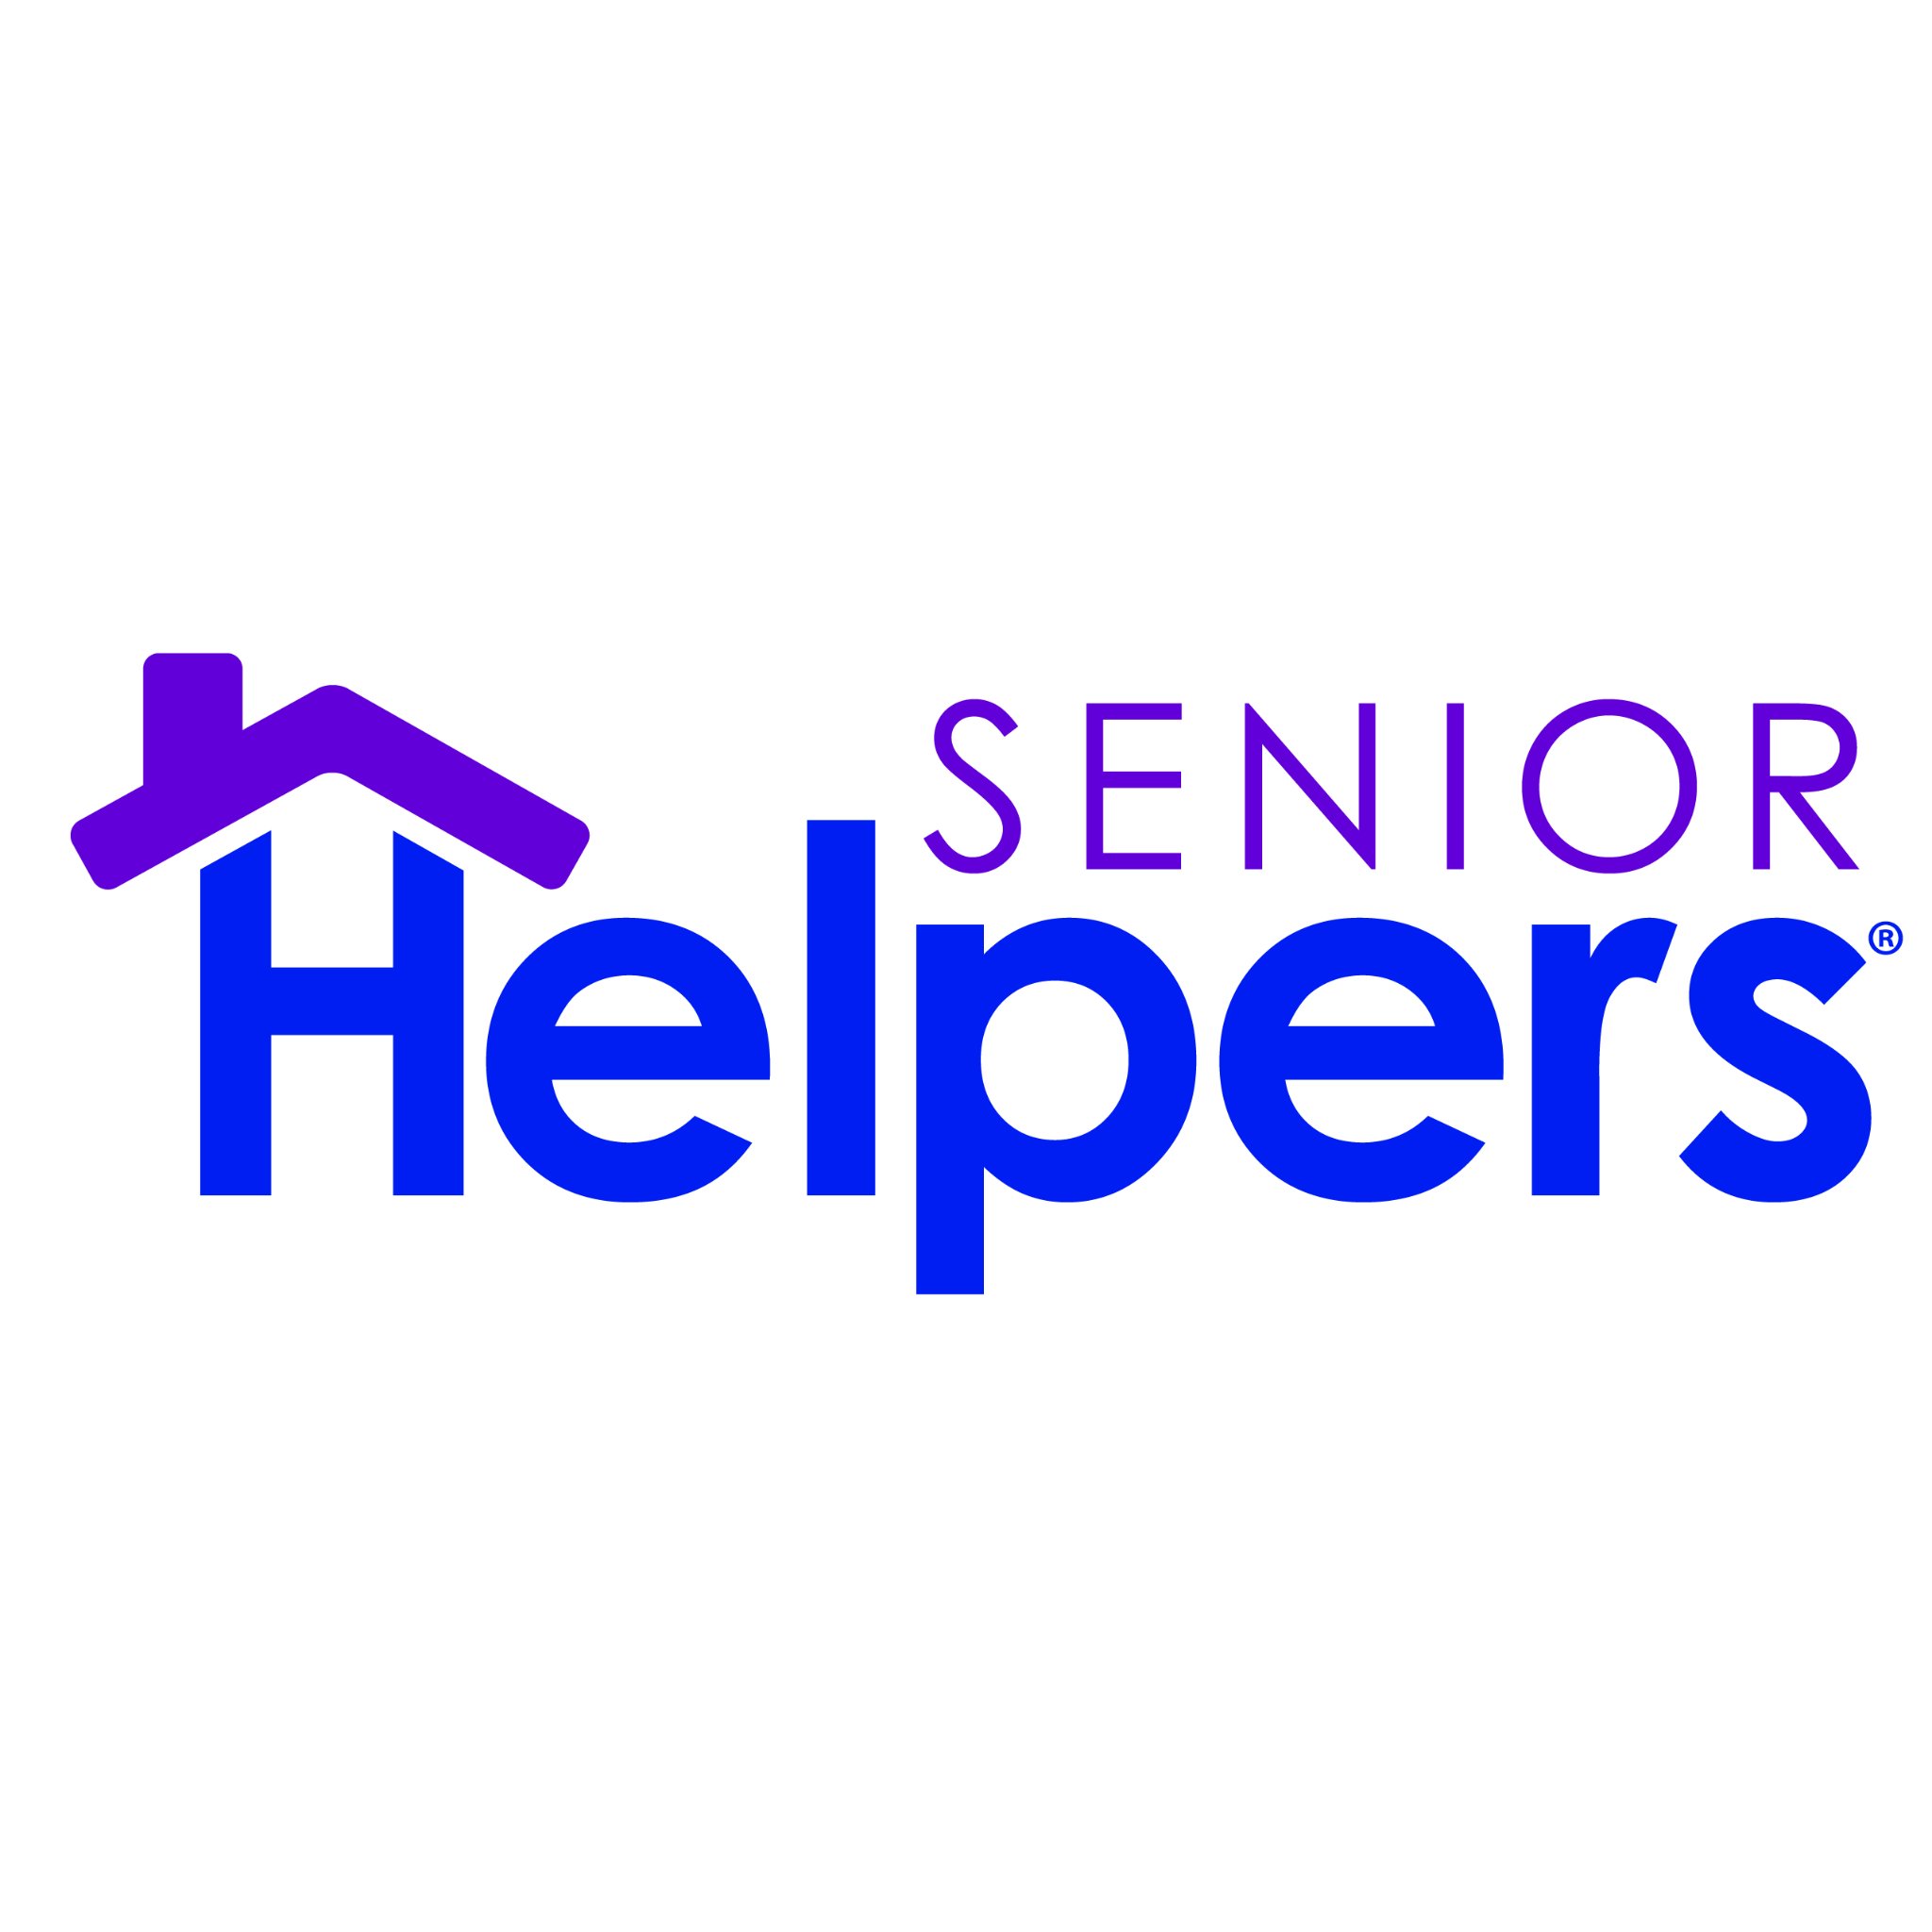 Senior Helpers Provides a full array of professional in-home care services for the elderly. 312-867-7110